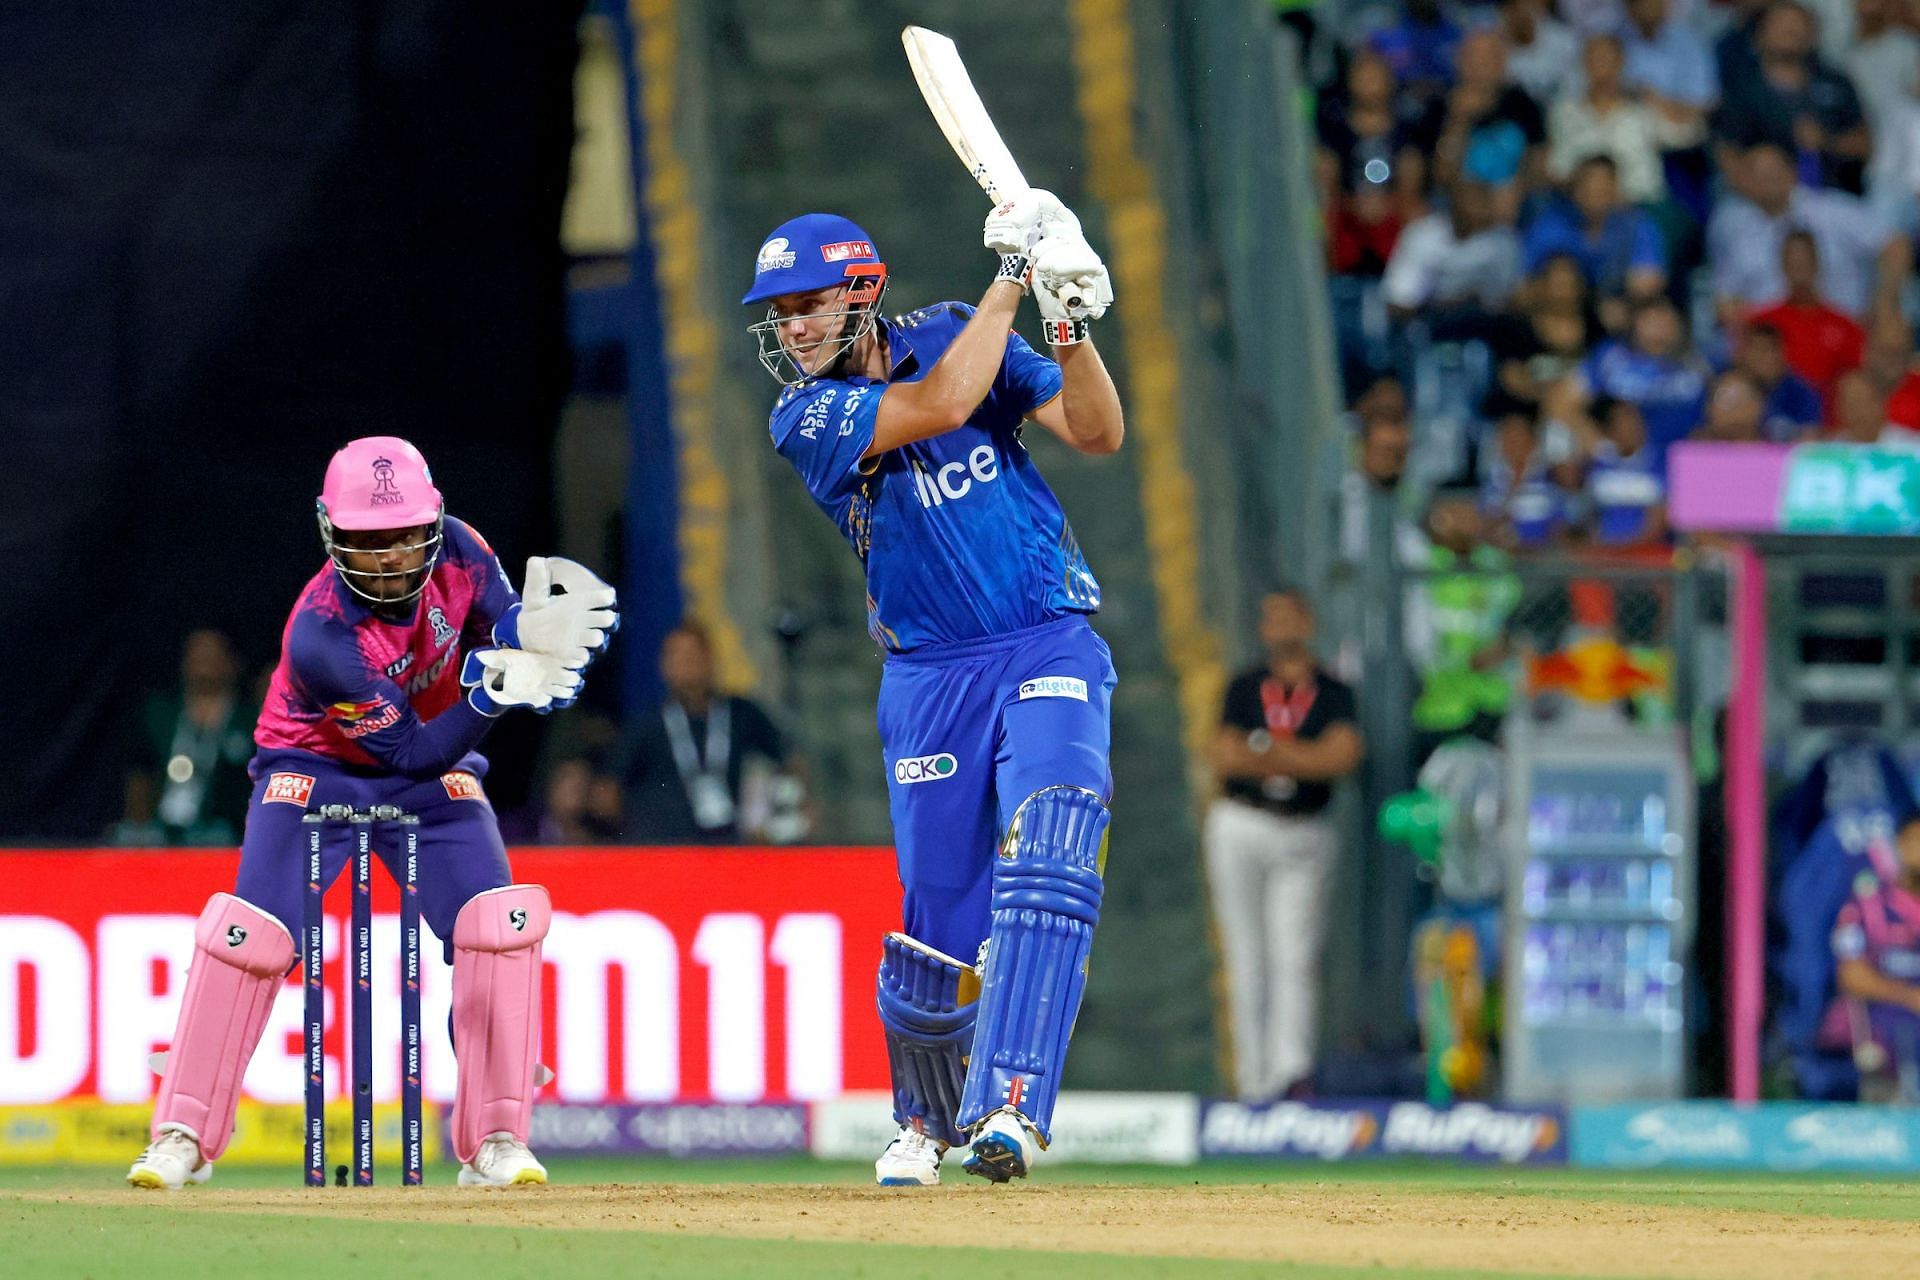 Cameron Green in action (Image Courtesy: Twitter/IPL)